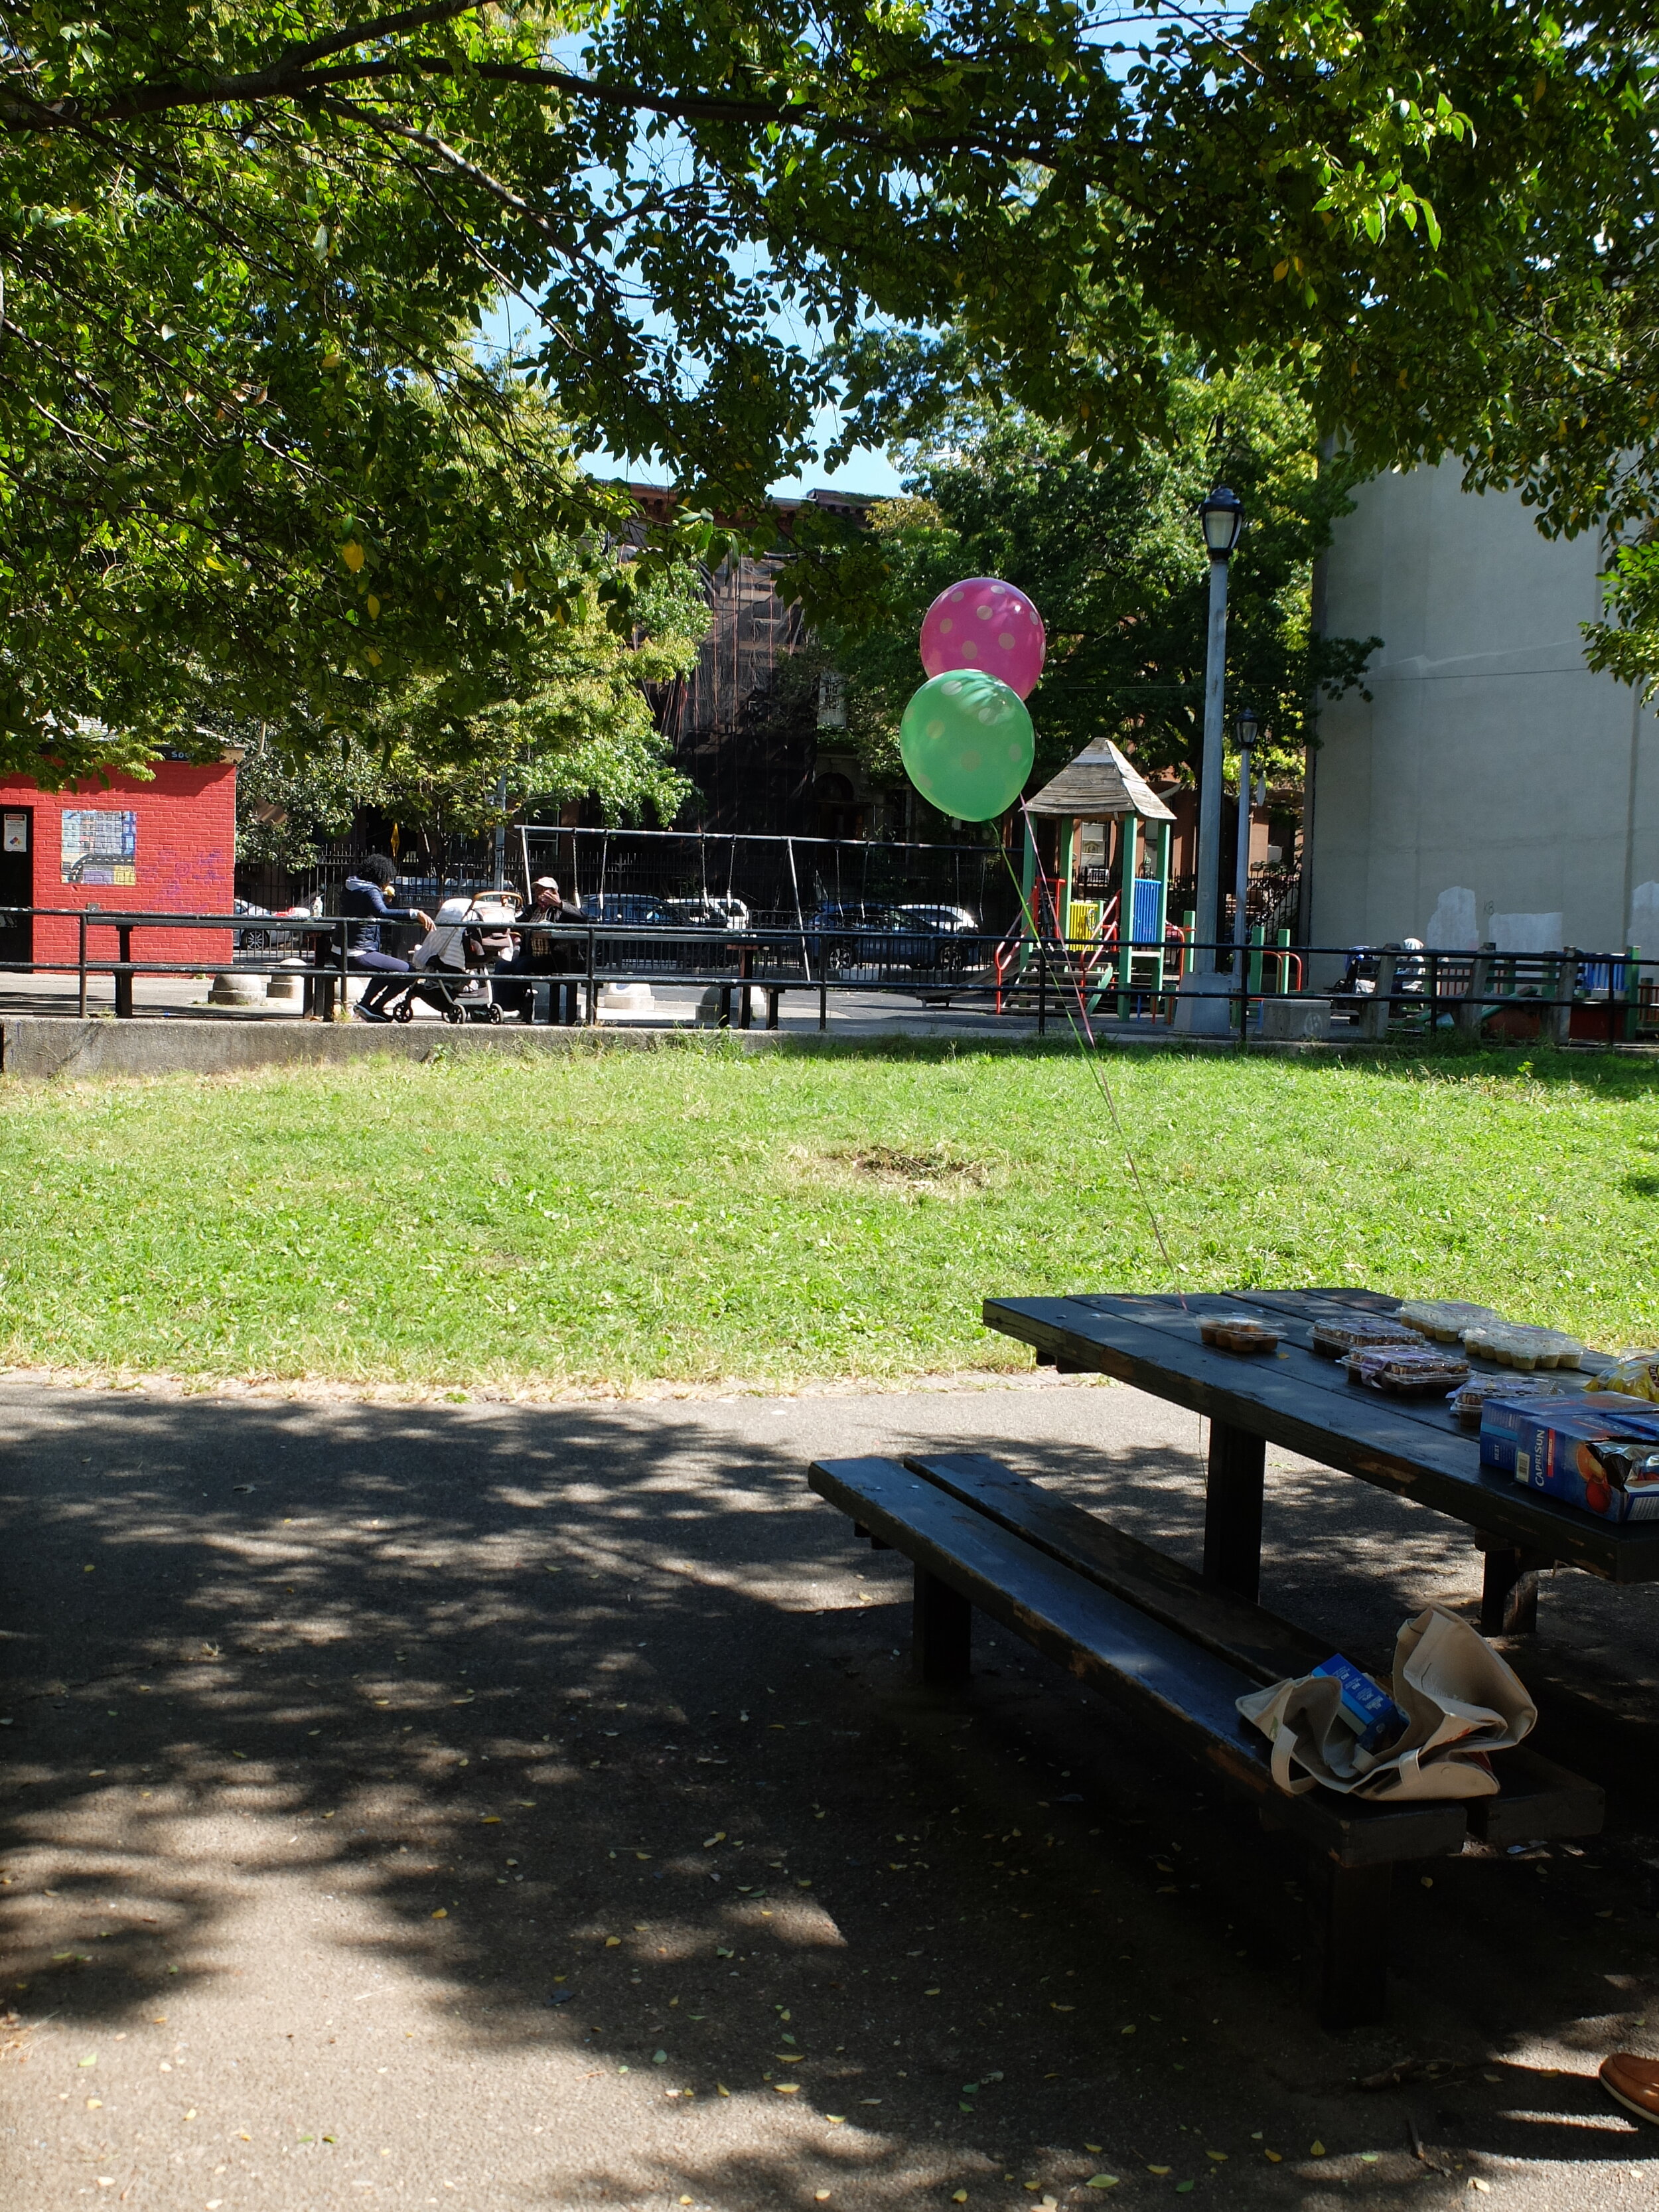  Parham Playground, Clinton Hill, one of the highest areas in B'klyn  L.uca &amp; Eloïse’s P.S. 20 is adjacent to the playground.  Luca’s class walked over to celebrate his 6th birthday here. 